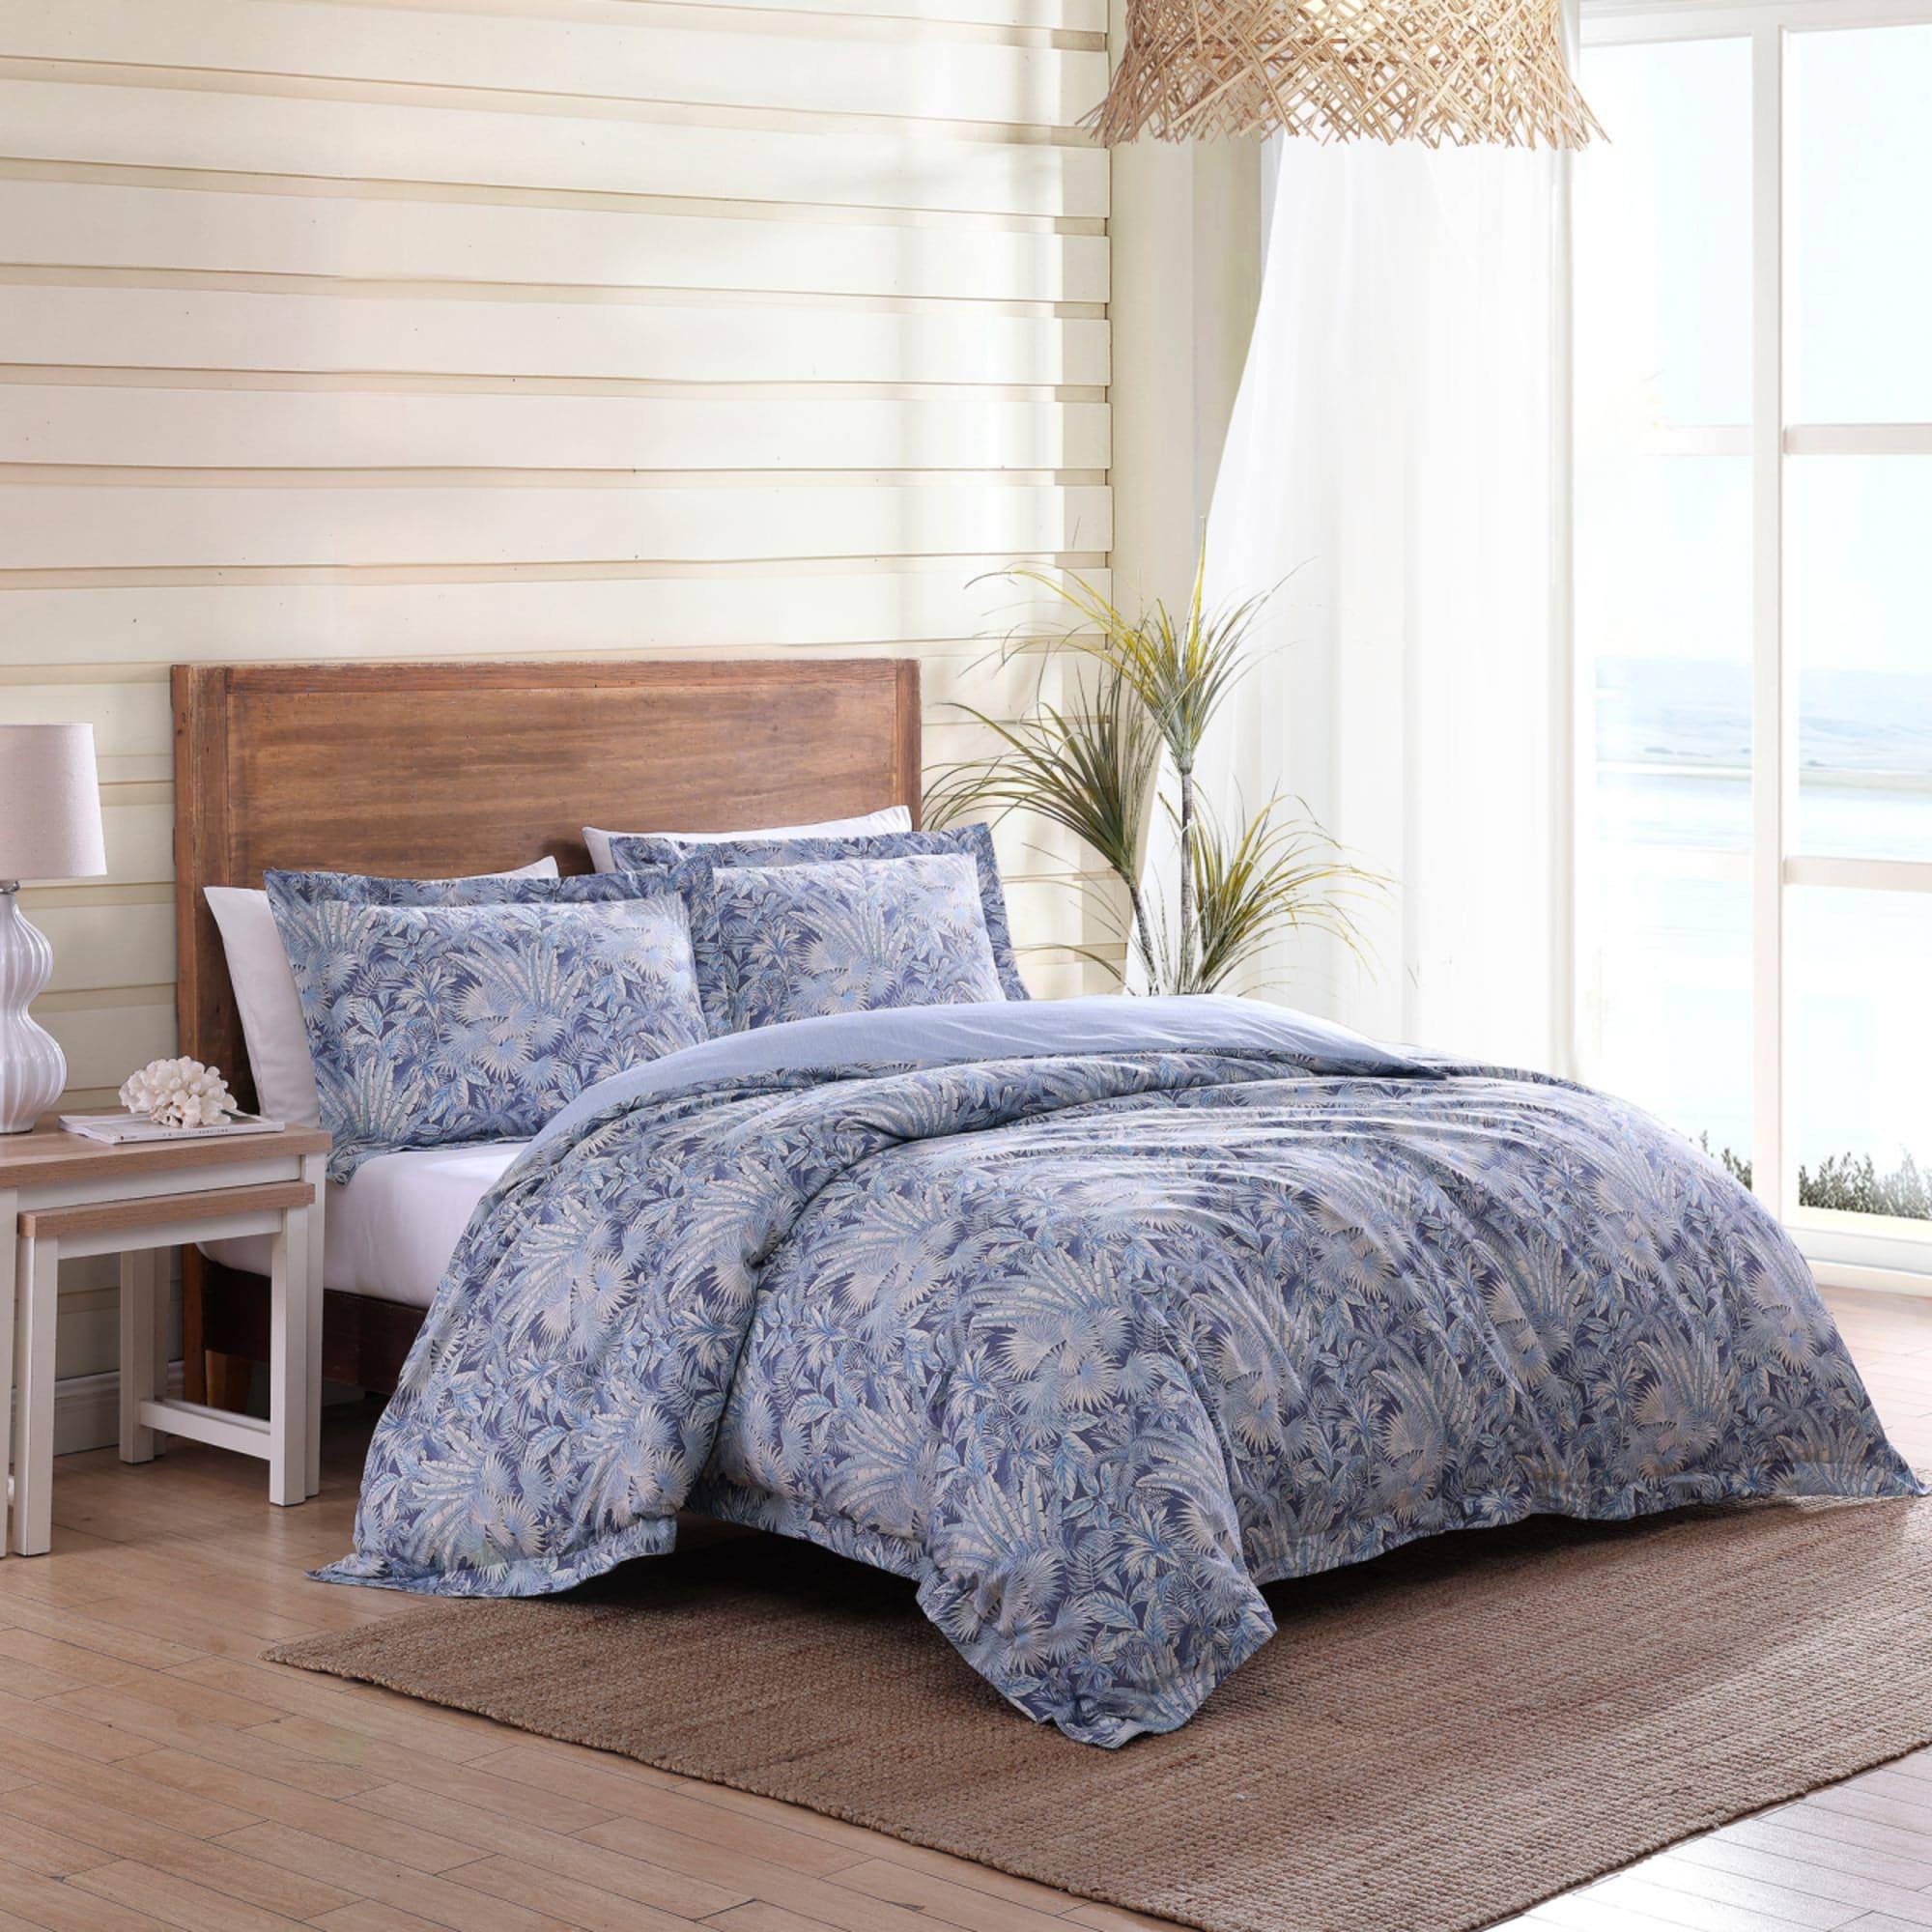 Tommy Bahama Bahamian Quilt Cover Set King Image 3